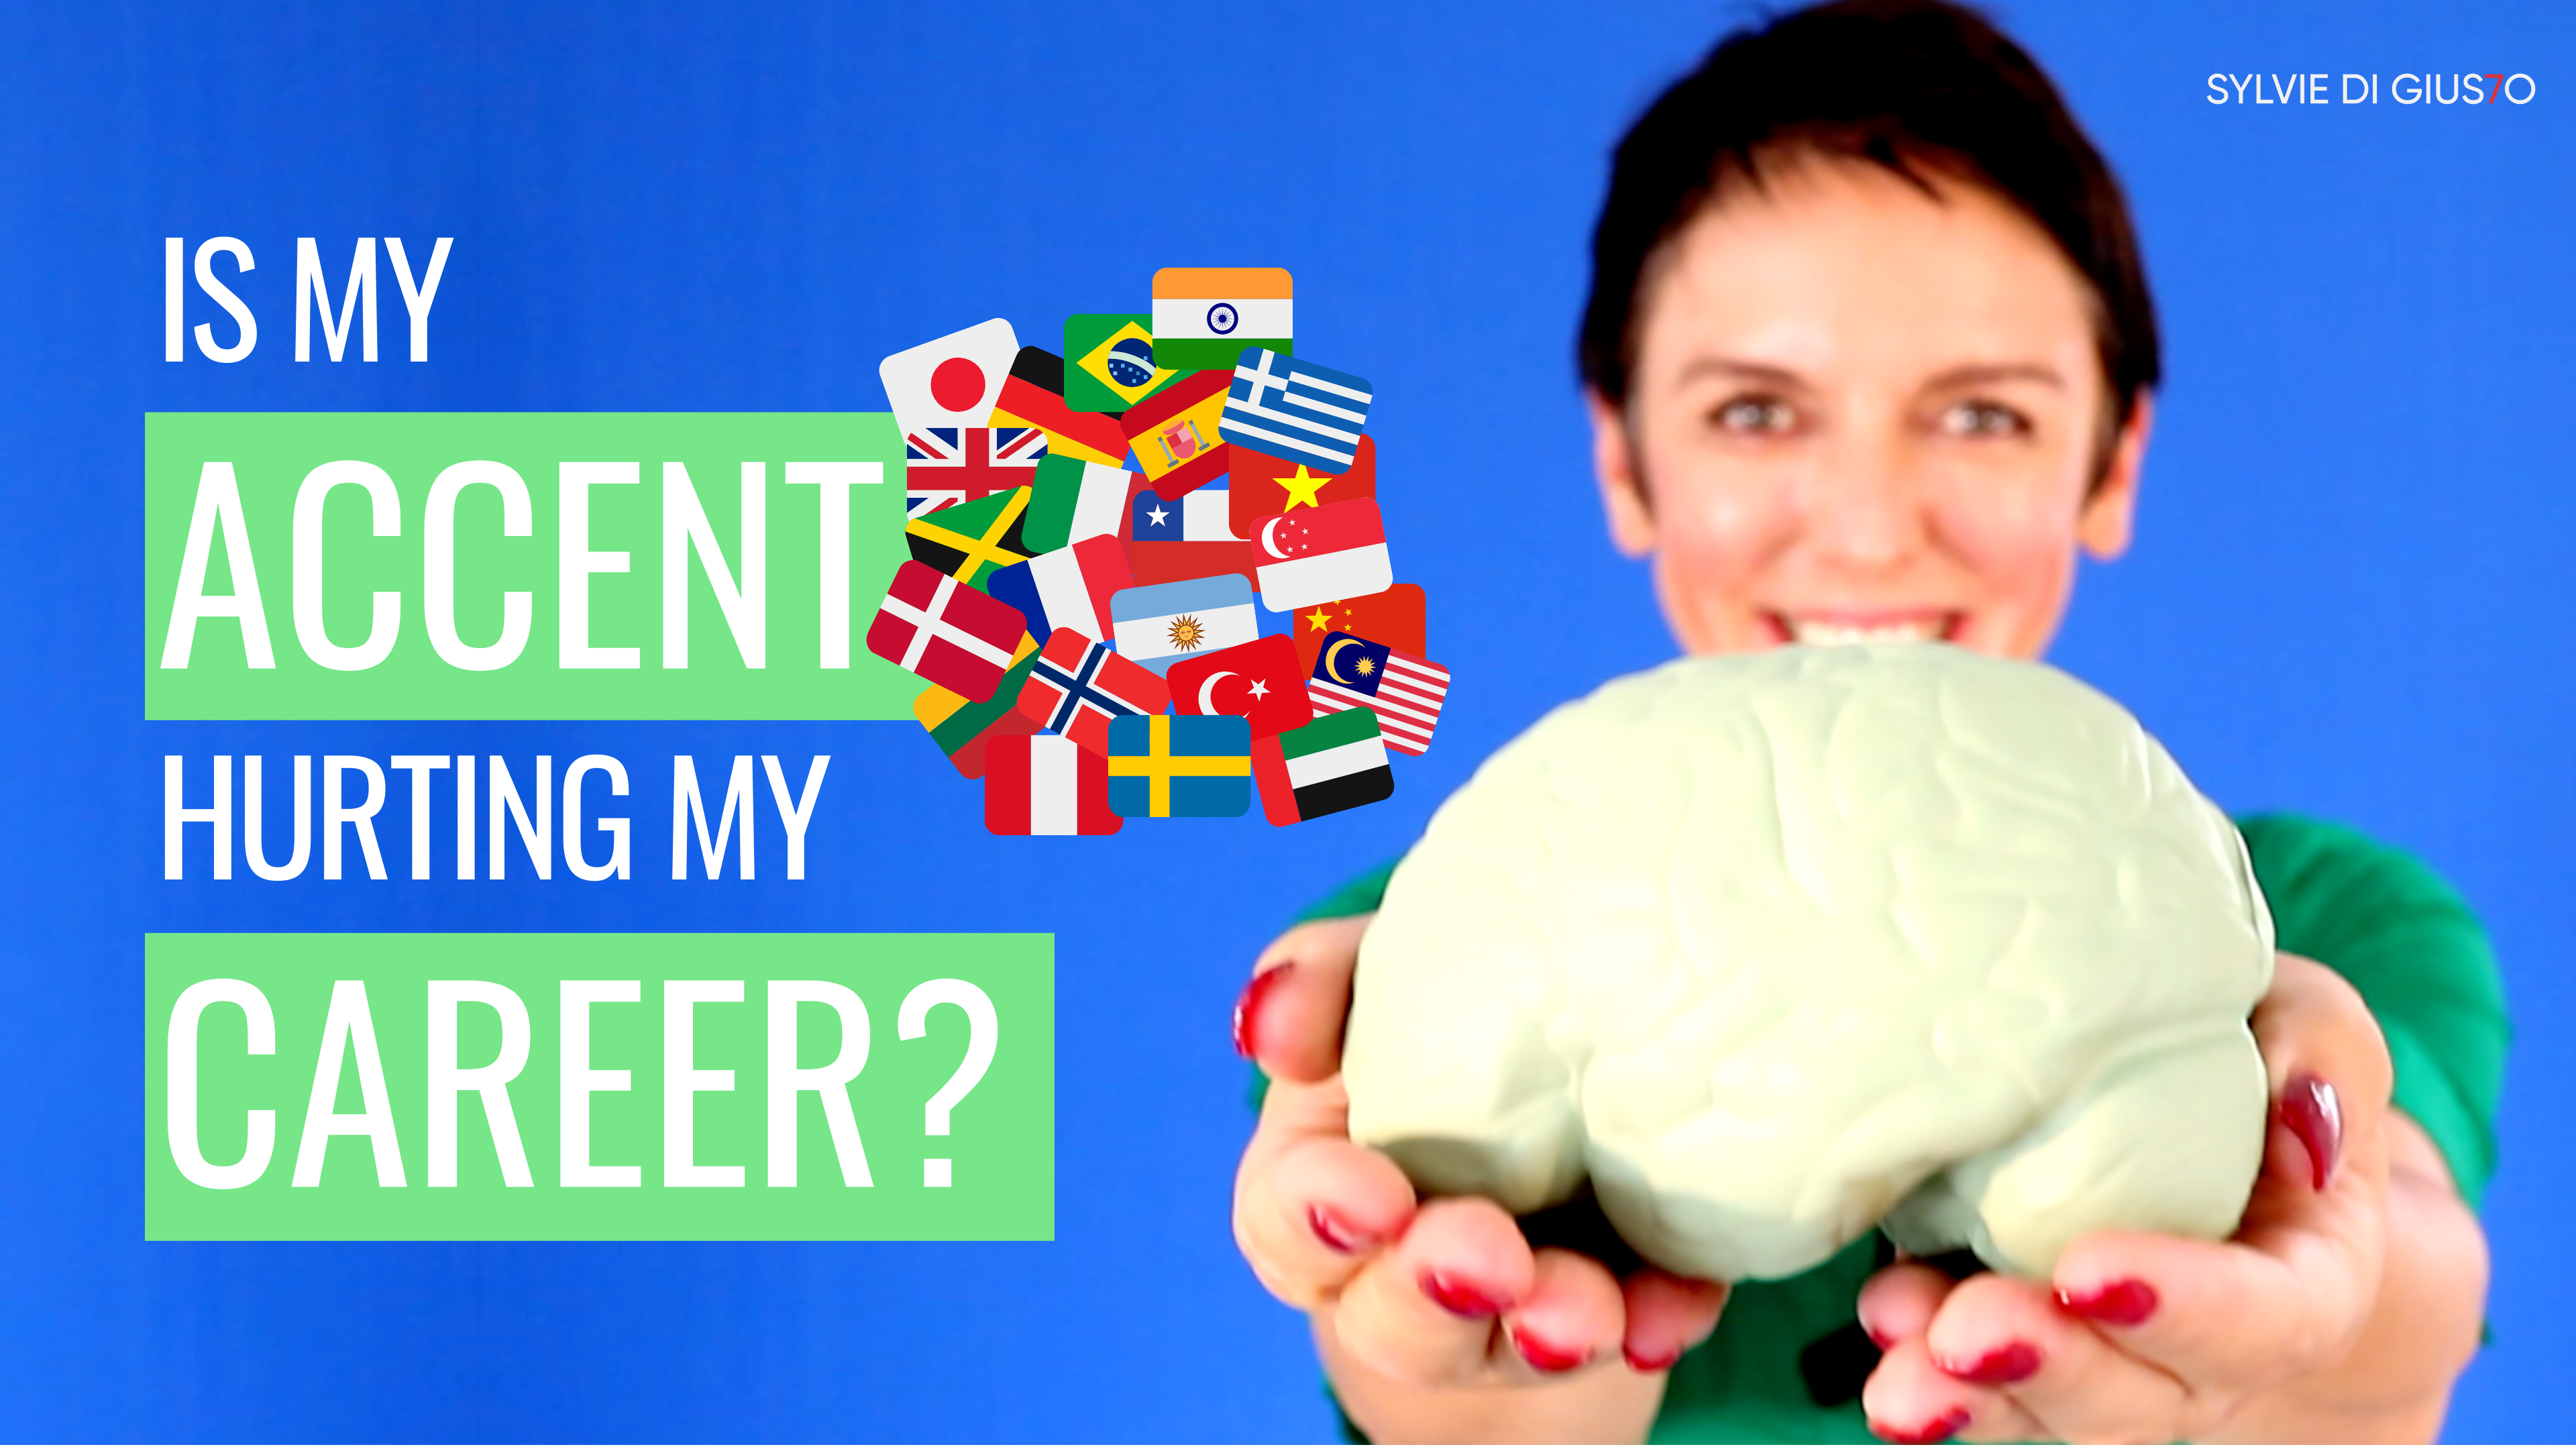 Is my accent hurting my career